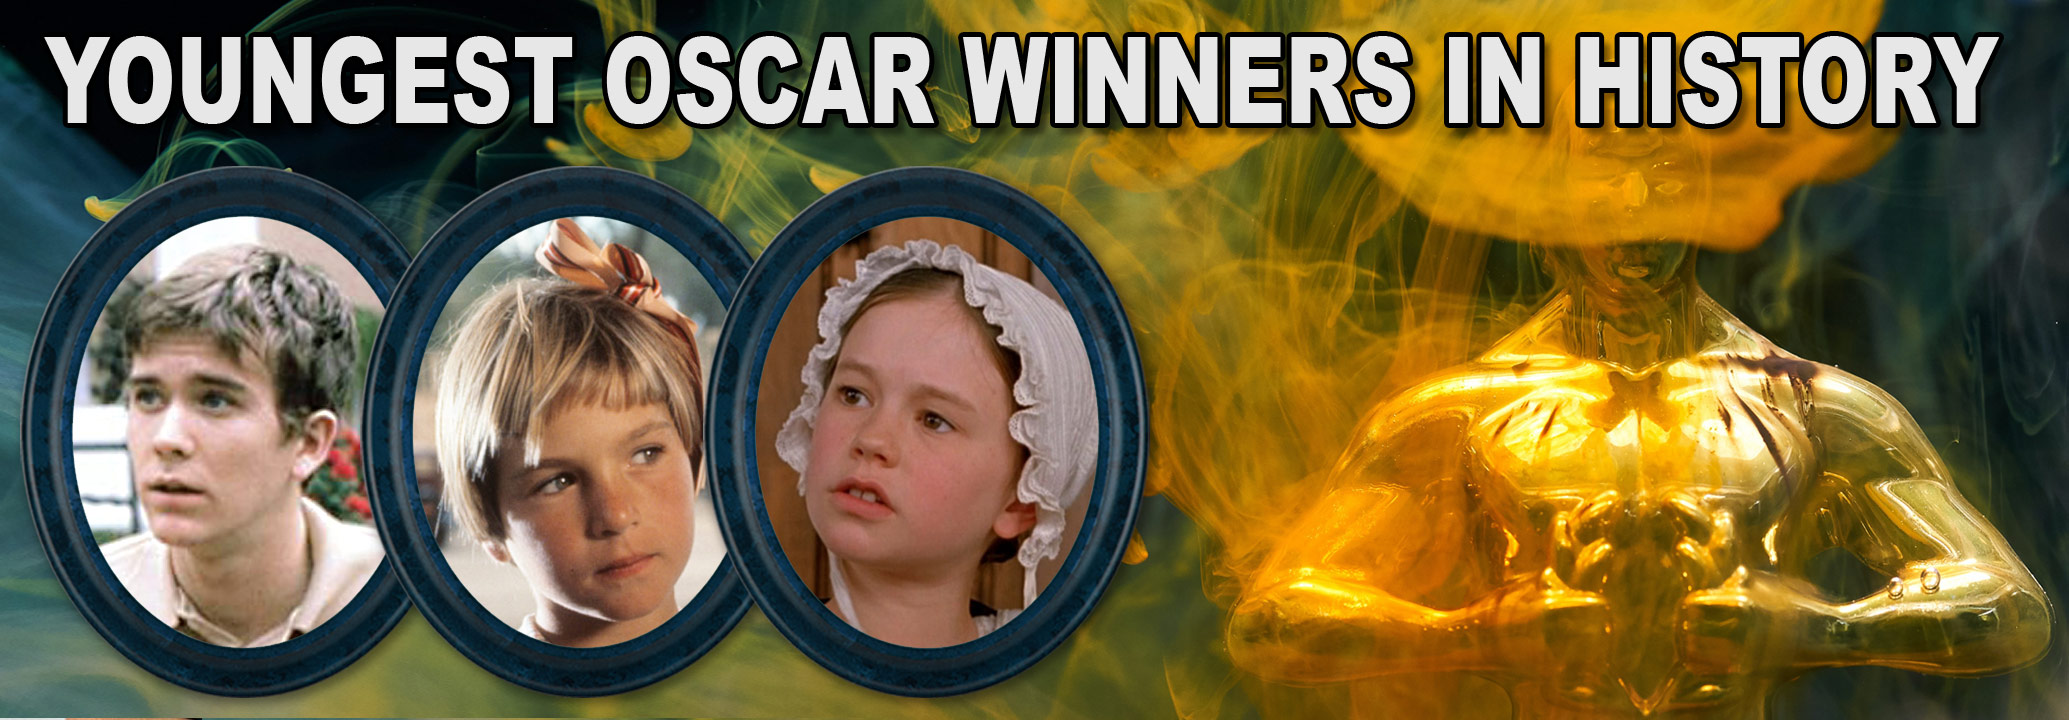 Youngest Oscar Winners in History